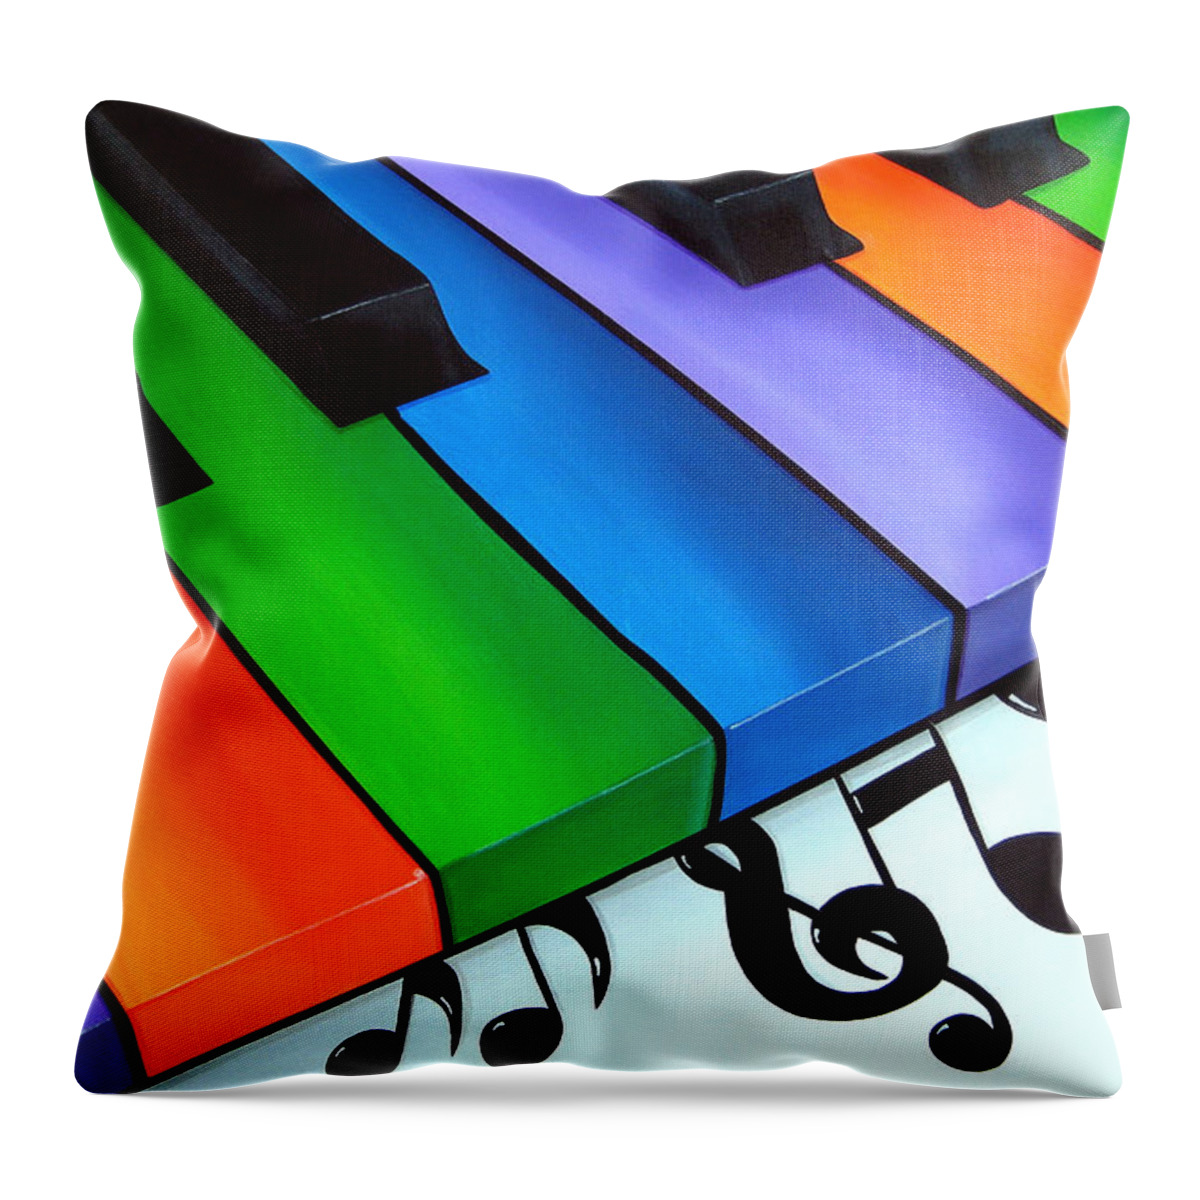 Pop Art Throw Pillow featuring the painting Keys by Fidostudio by Tom Fedro